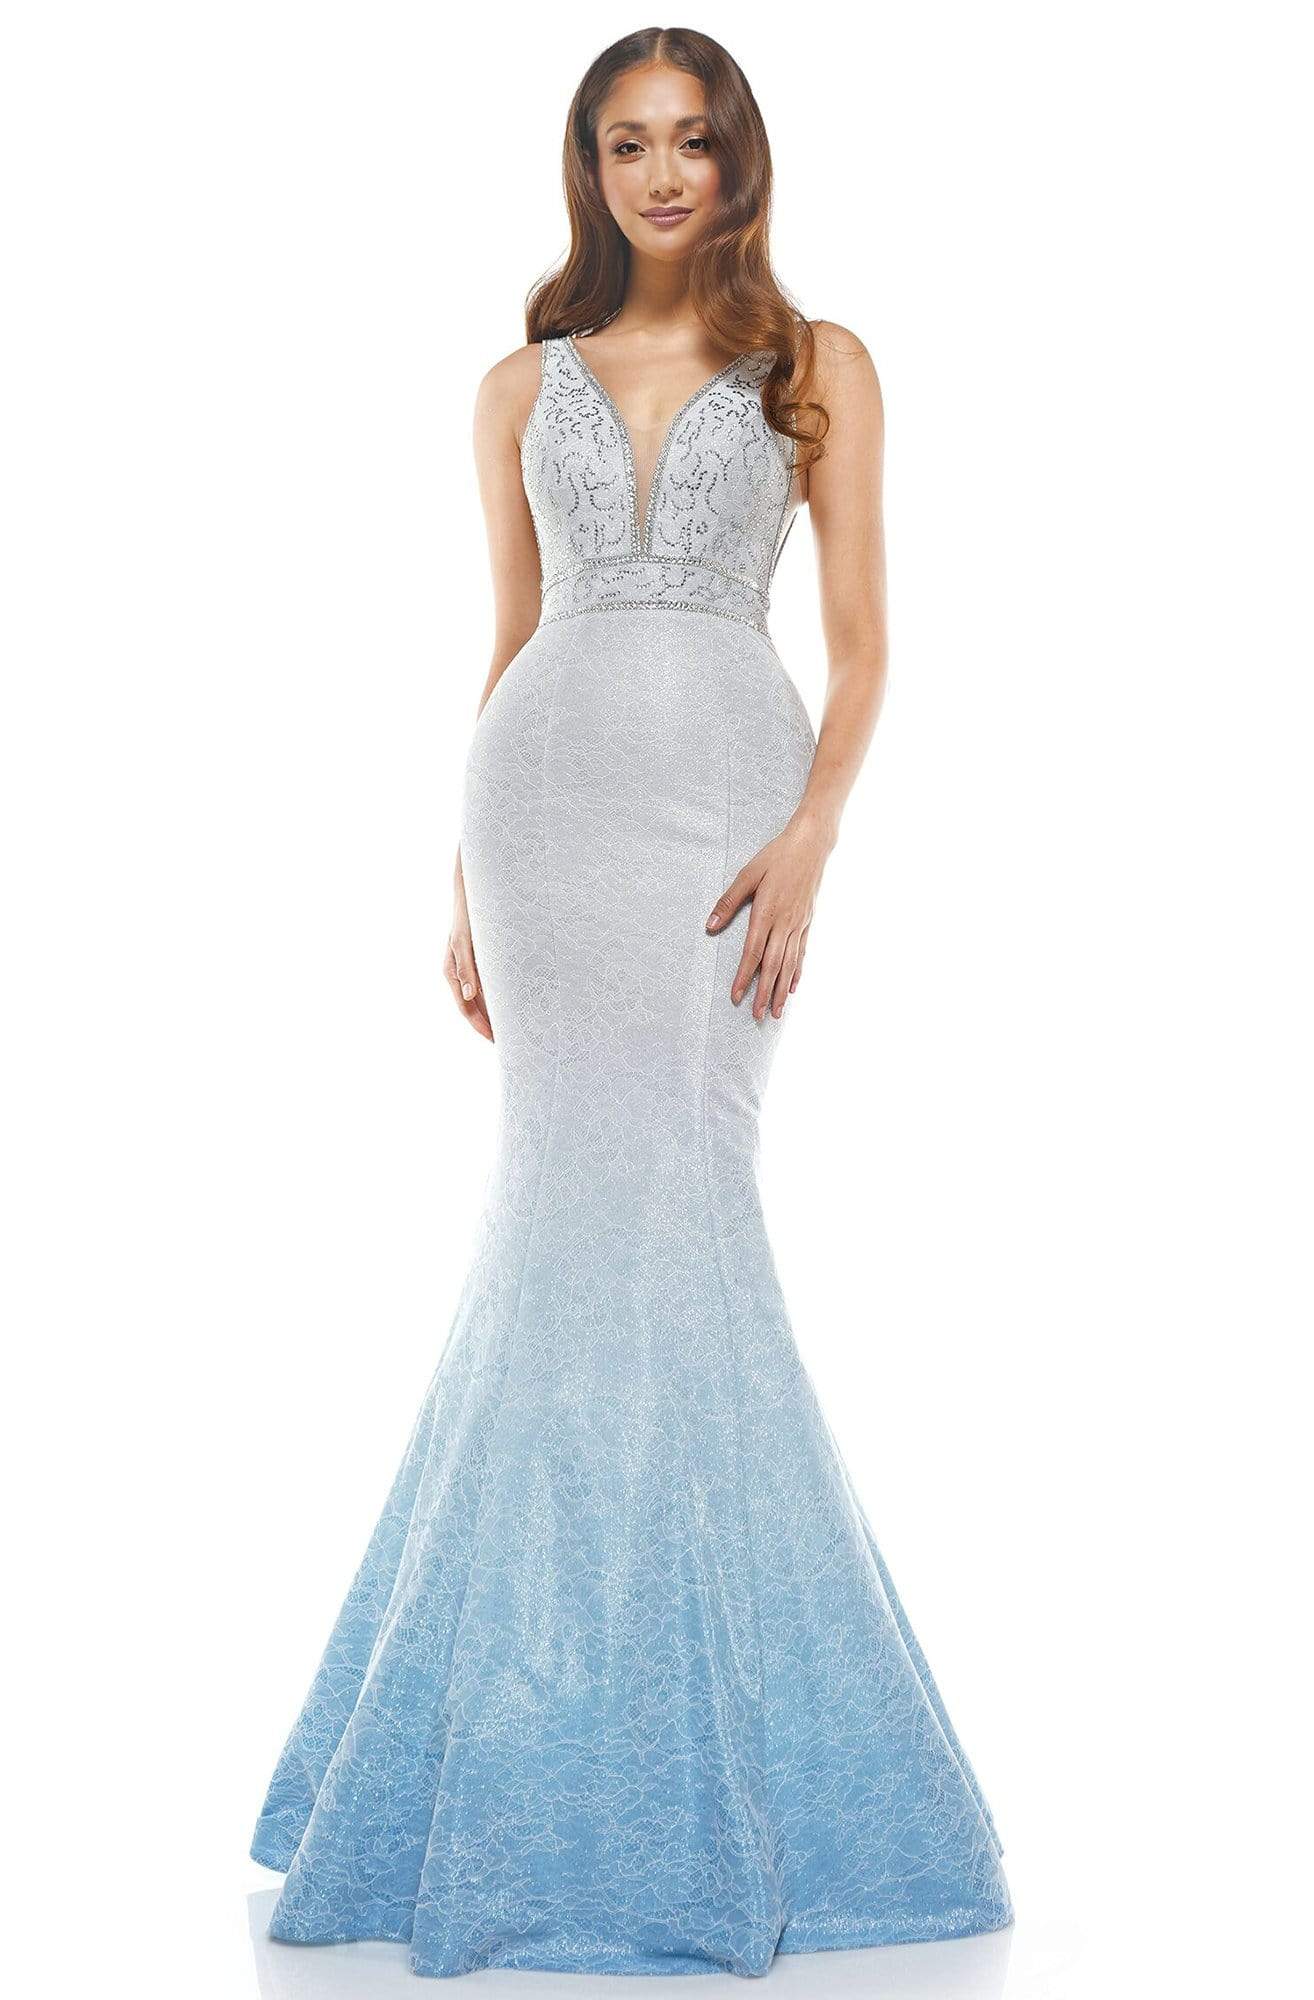 Colors Dress - 2272 Sleeveless Ombre Laced Mermaid Dress In Blue and White